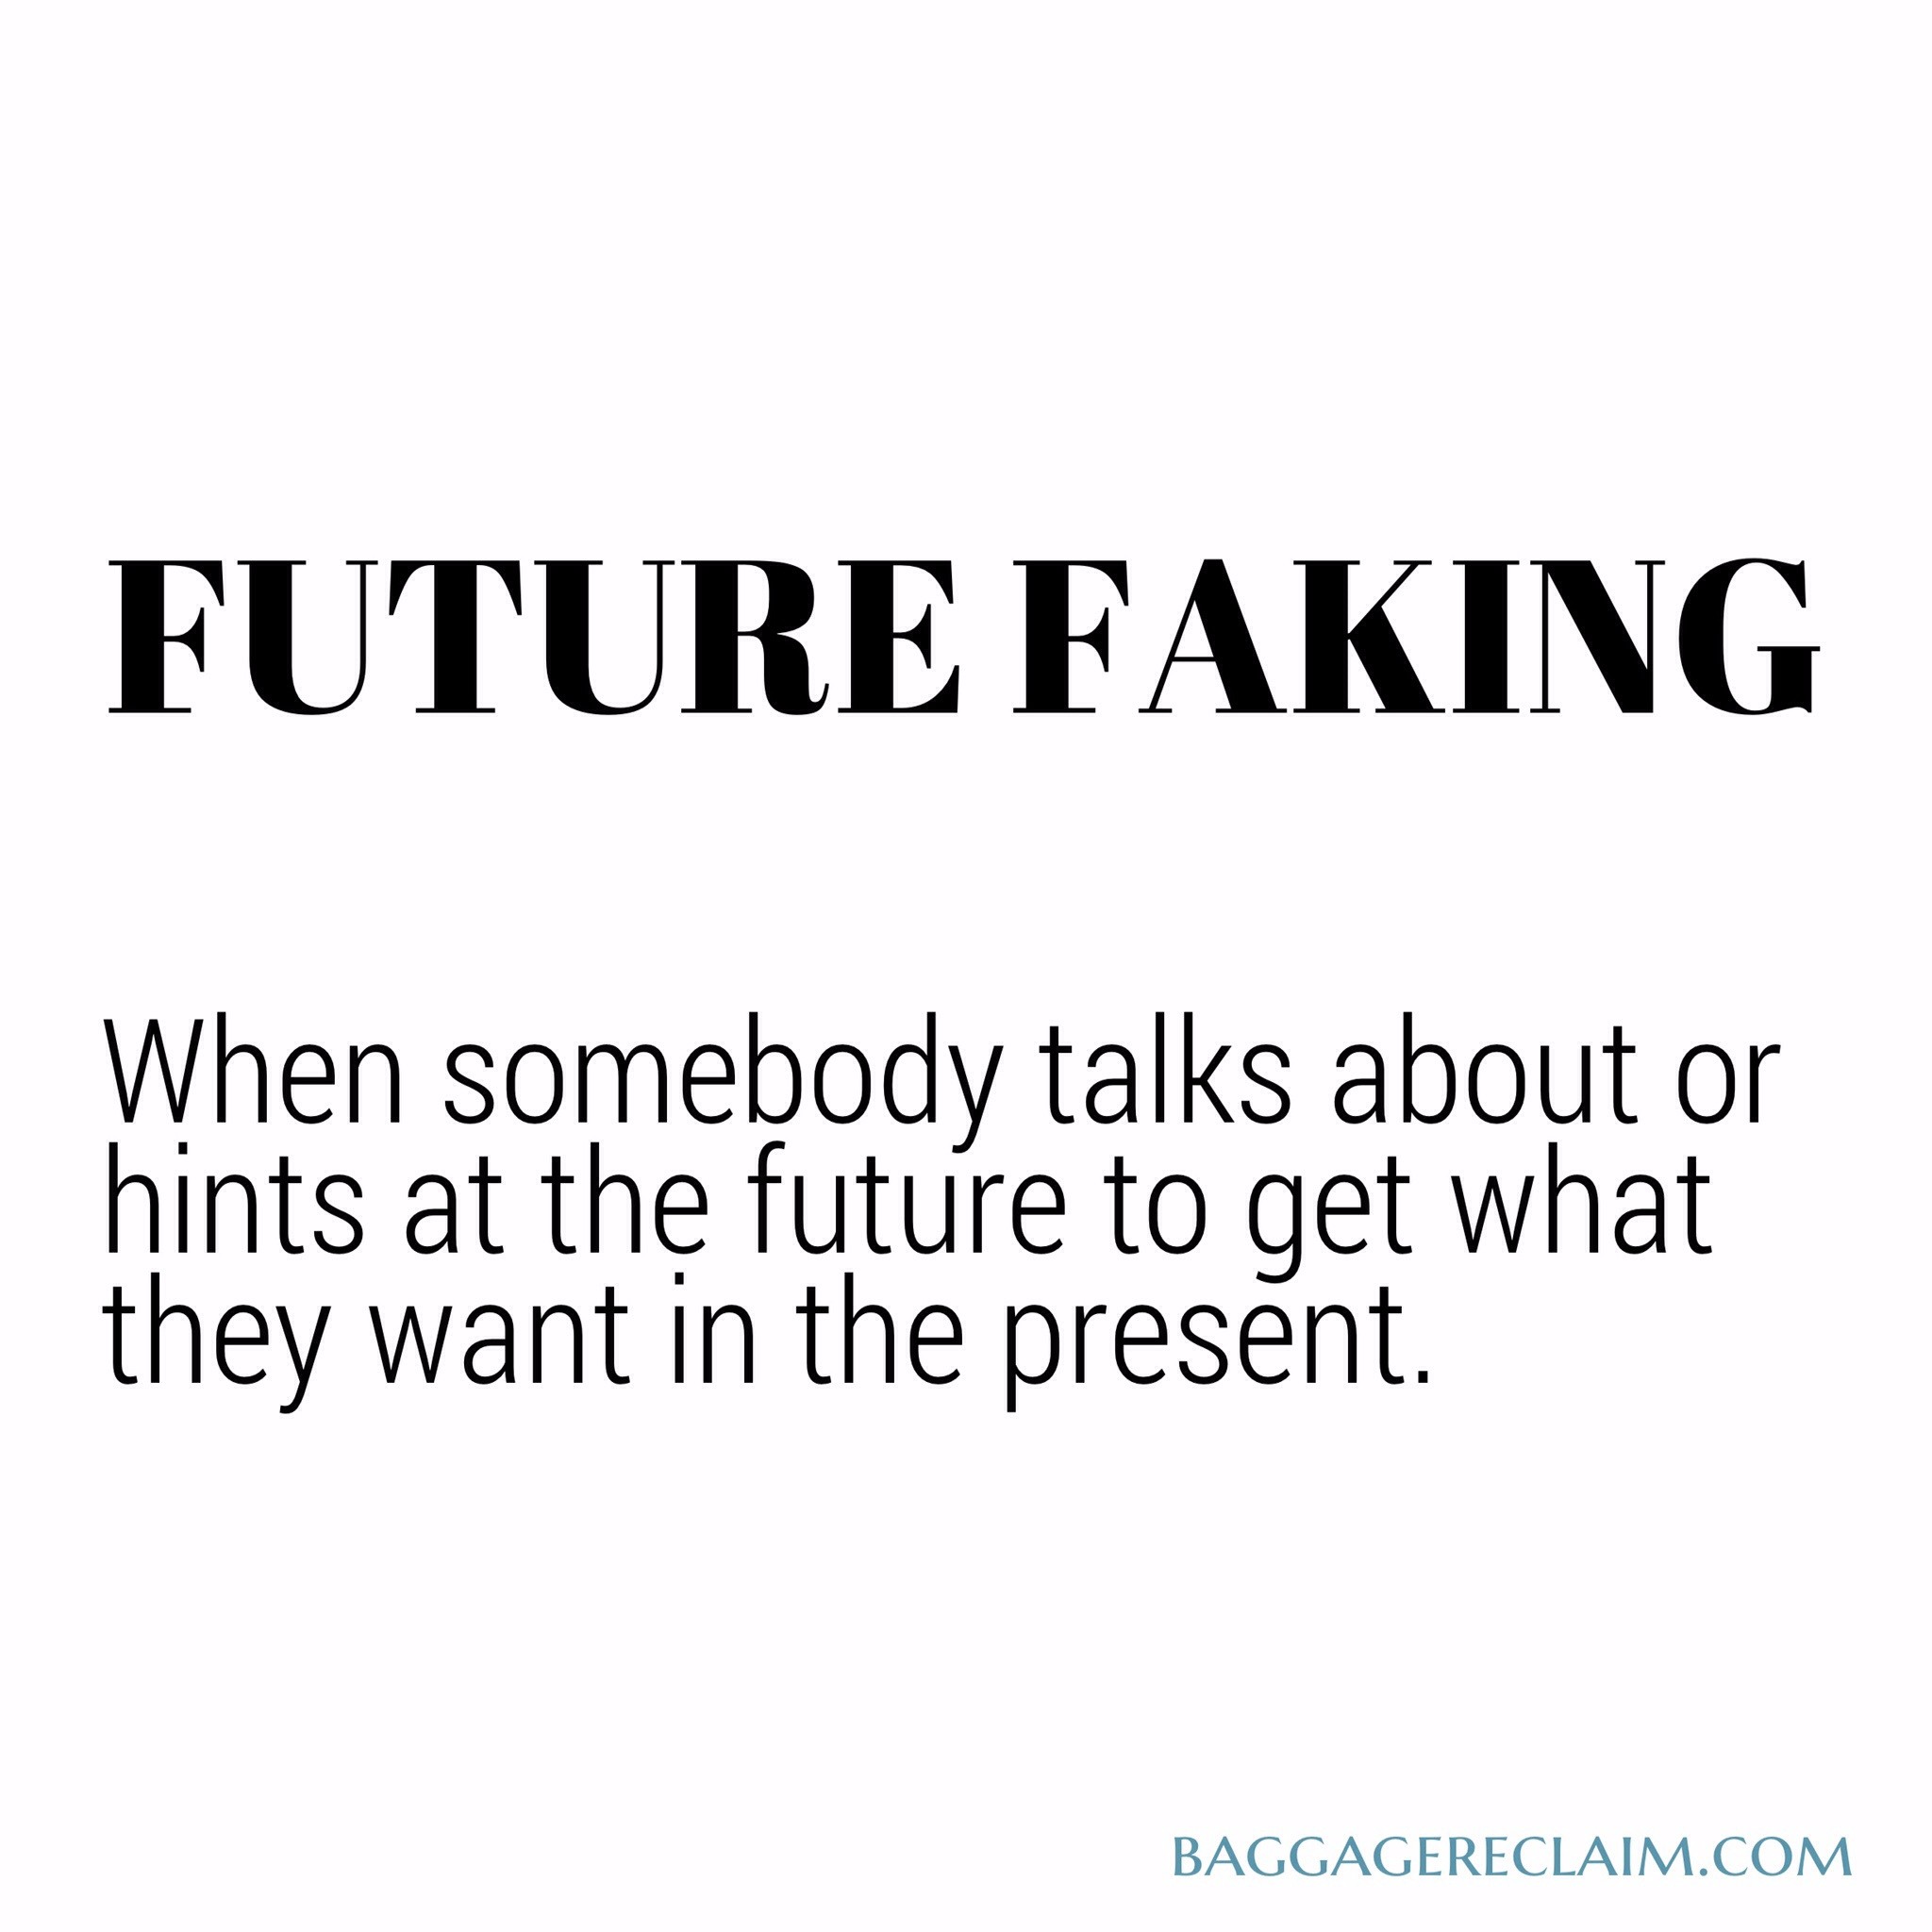 Future Faking is partly about using intentions to enhance self-image